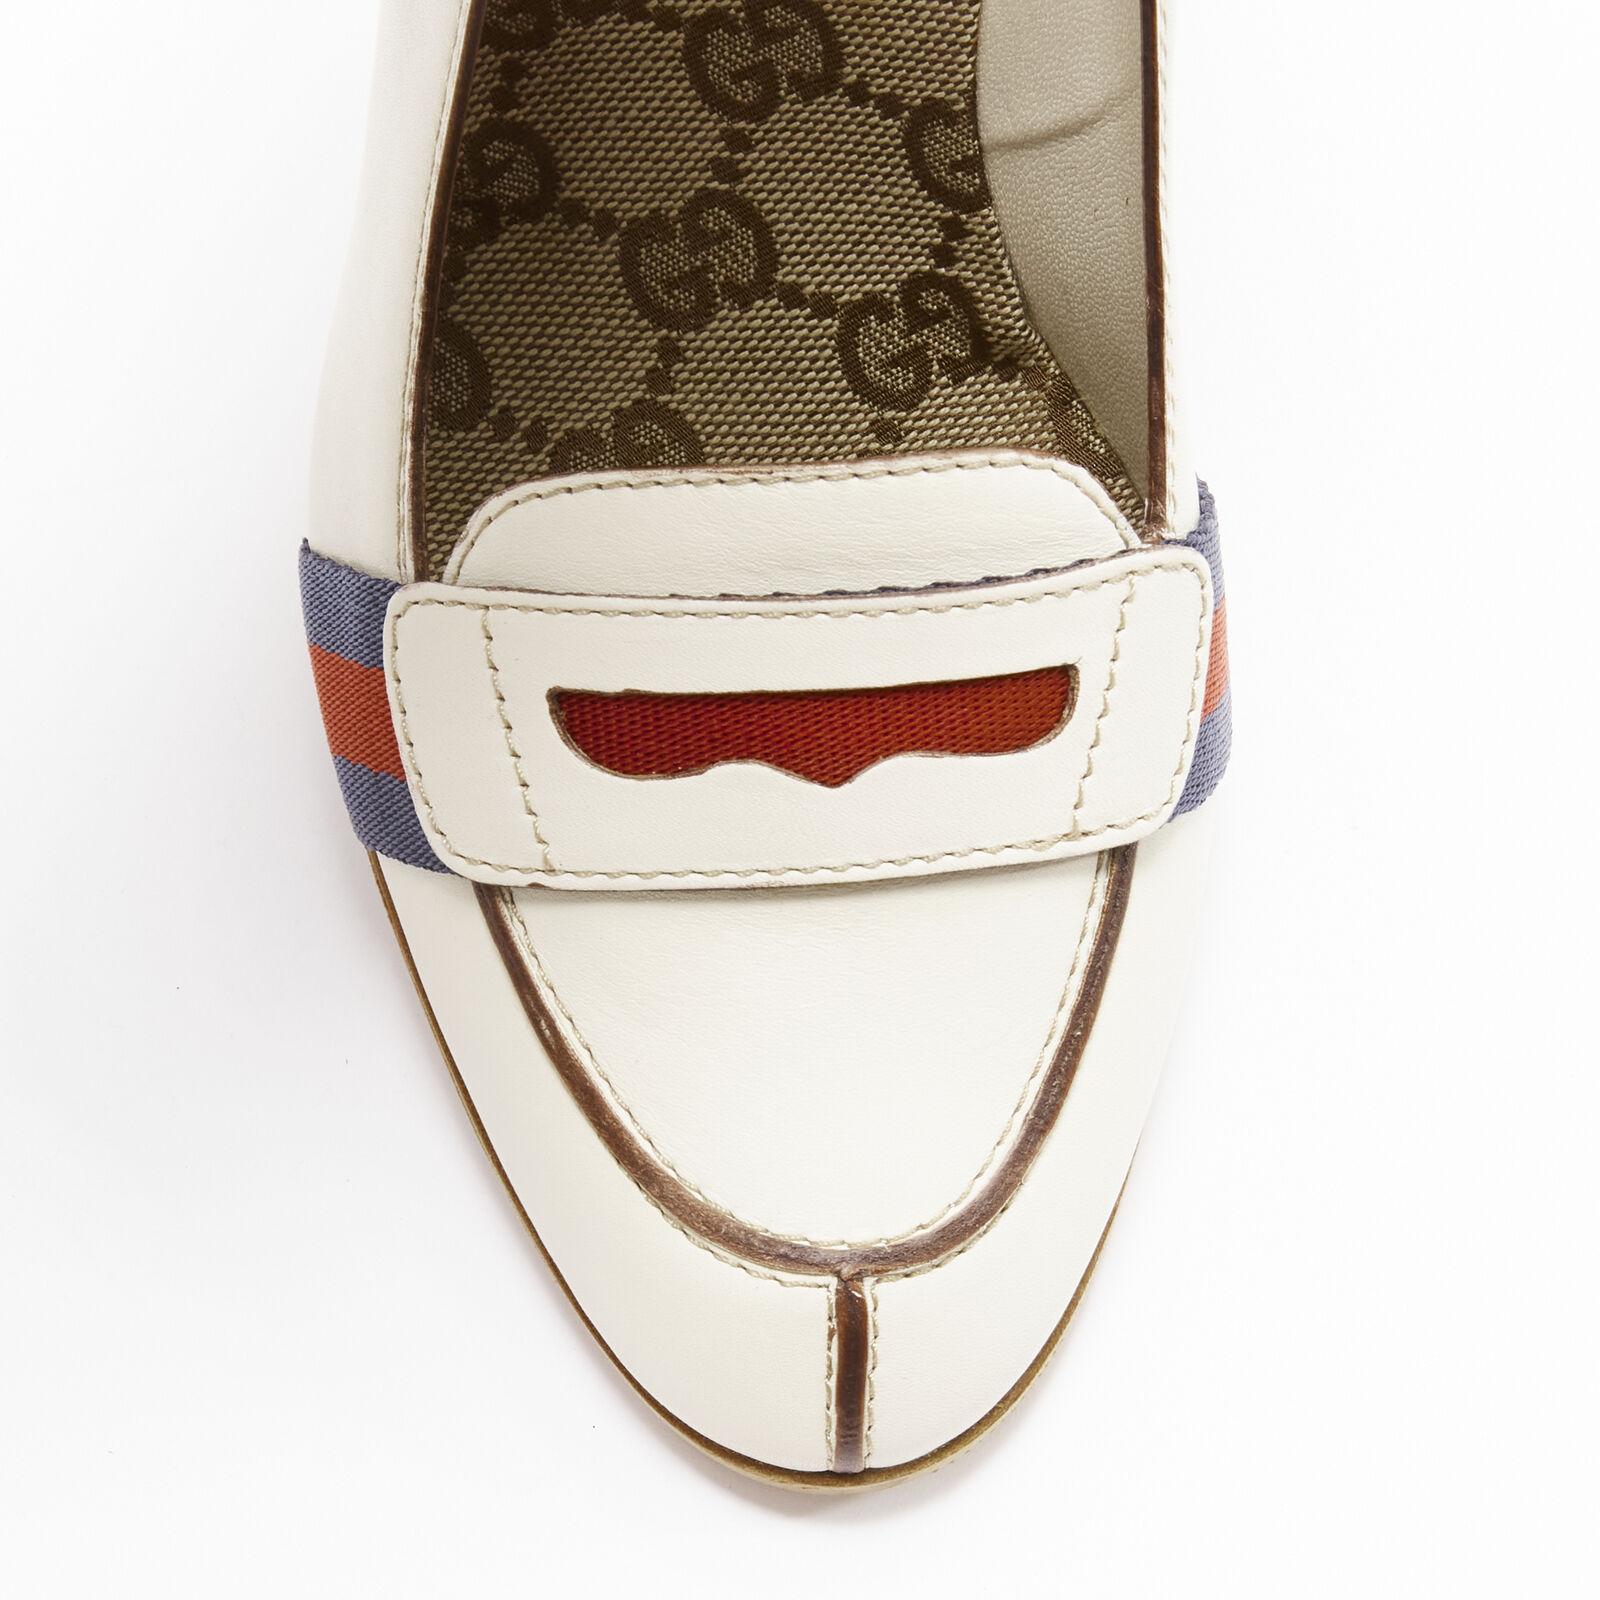 GUCCI white signature Web brown piping high heel loafer pumps EU36.5
Reference: ANWU/A01053
Brand: Gucci
Material: Leather
Color: Off White, Multicolour
Pattern: Solid
Closure: Slip On
Lining: Leather
Extra Details: Brown leather piping